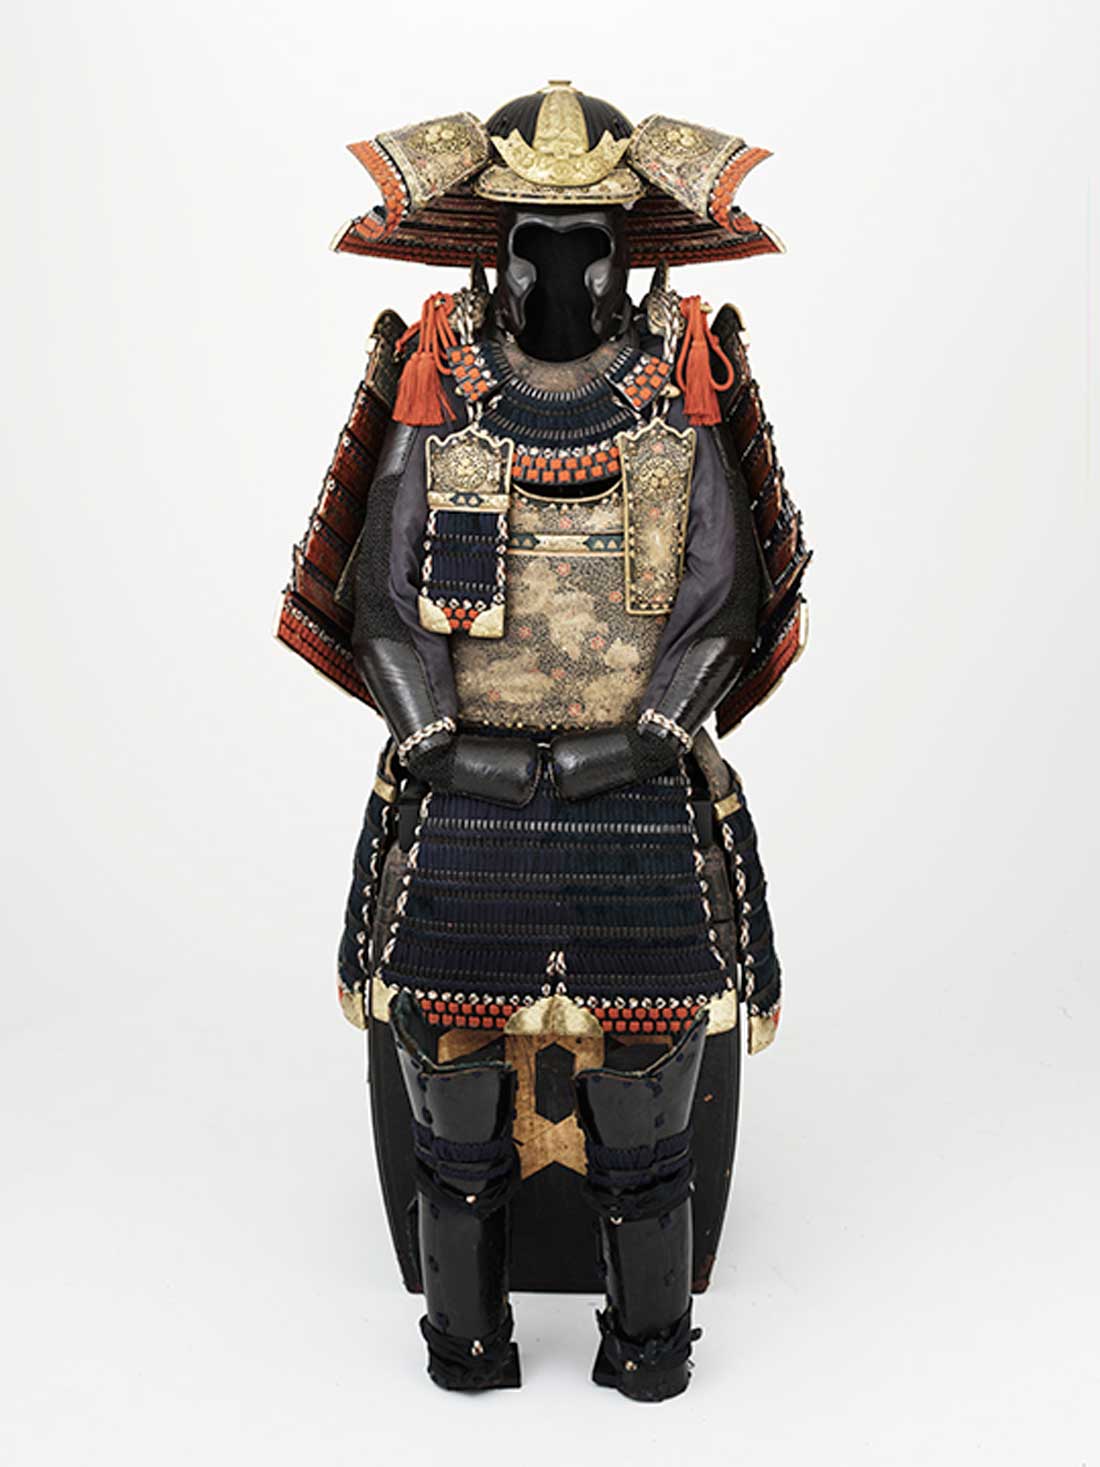 Iron, leather, gold, and bronze combine in this suit of armor from the mid-Edo Period.